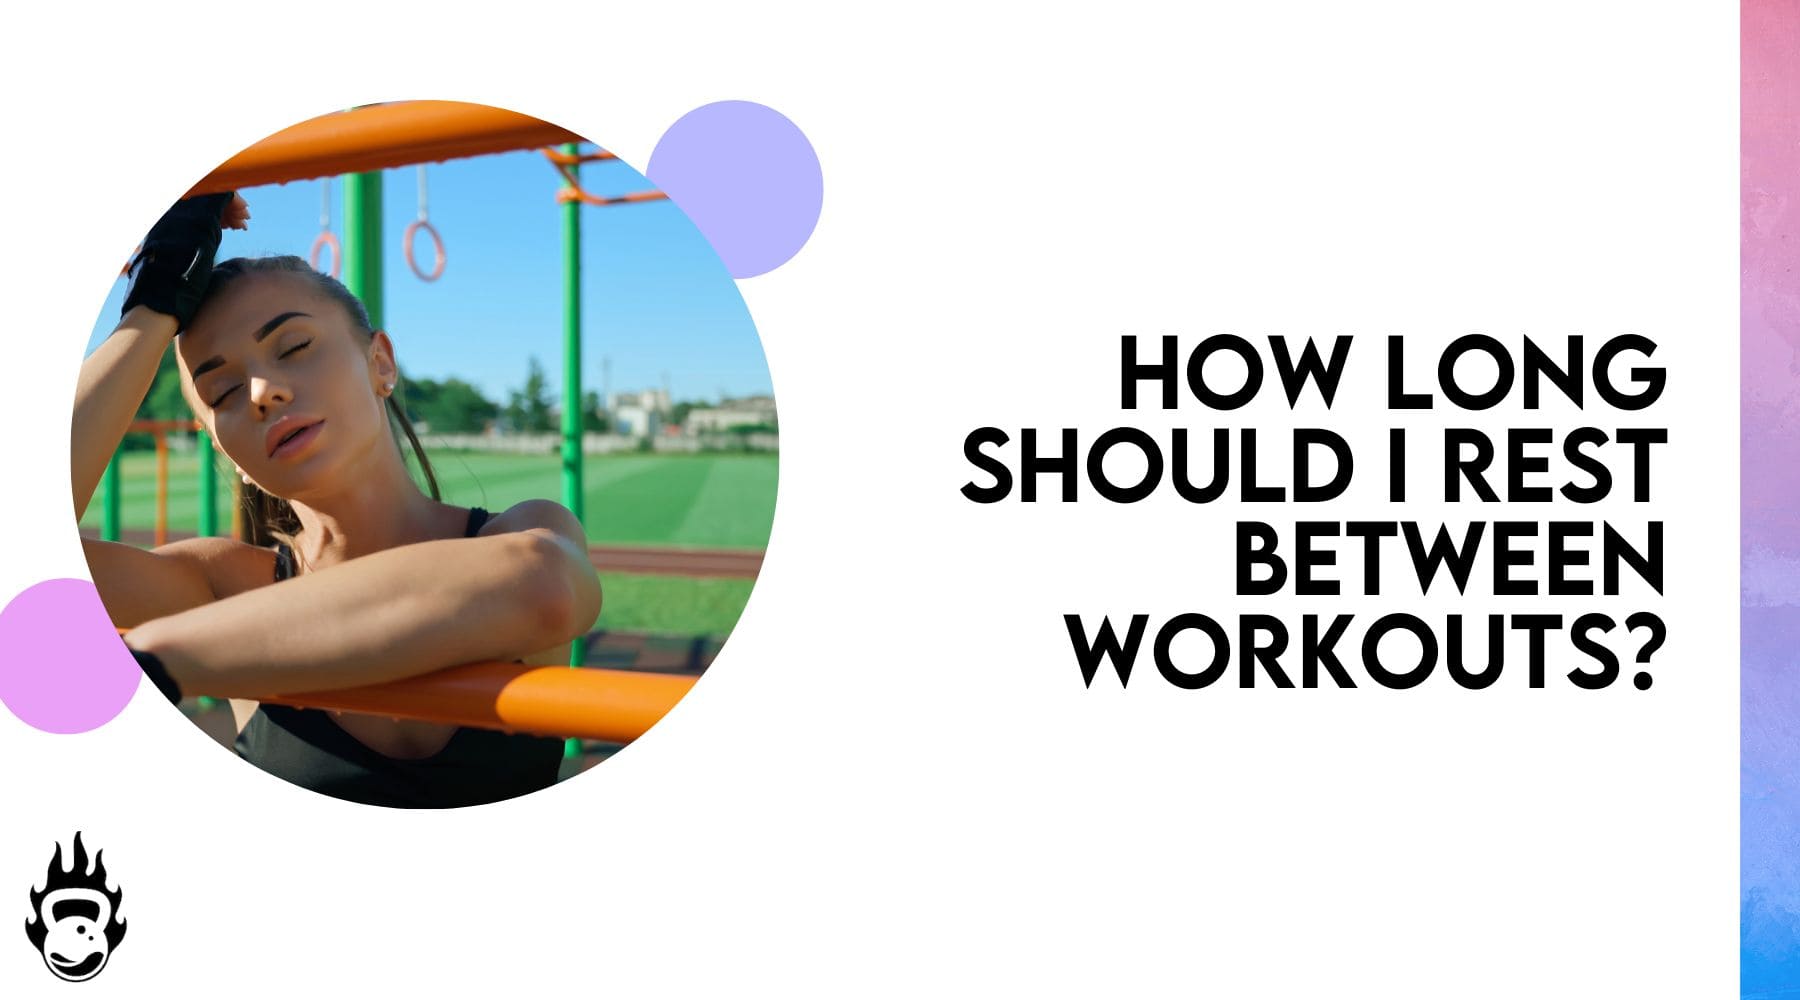 Why Are Rest Days Important For Fitness Progress? – SWEAT